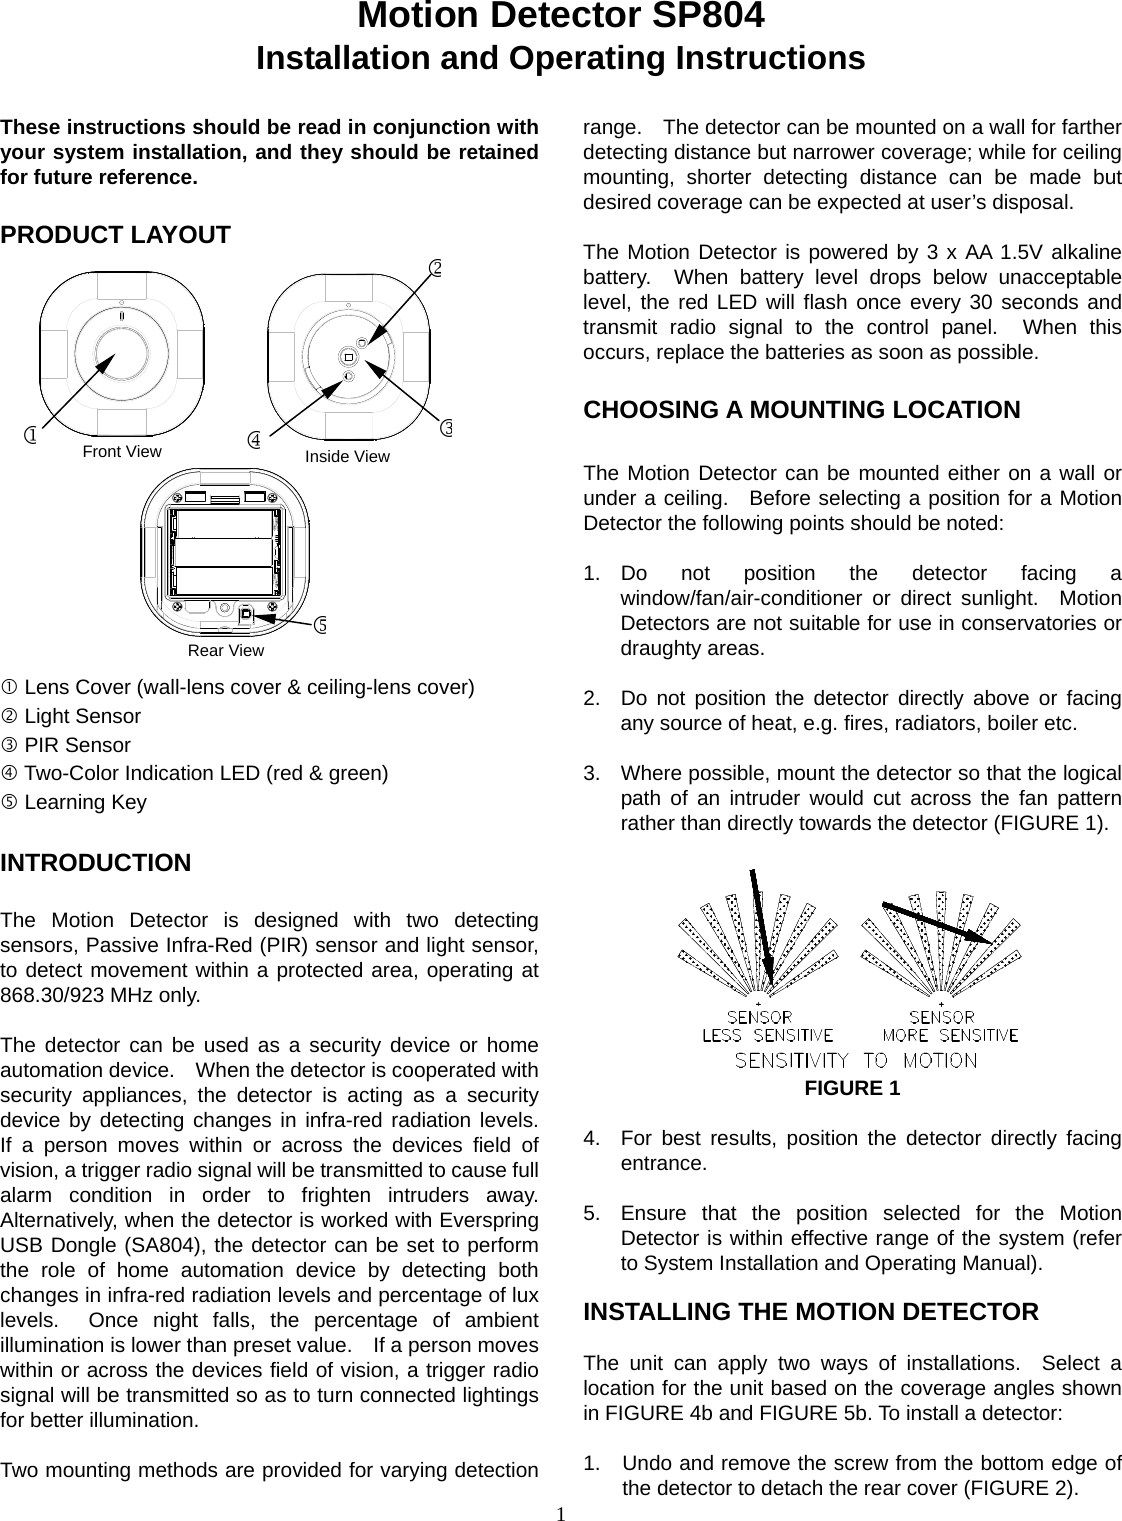  1Motion Detector SP804 Installation and Operating Instructions  These instructions should be read in conjunction with your system installation, and they should be retained for future reference.  PRODUCT LAYOUT                  Lens Cover (wall-lens cover &amp; ceiling-lens cover)  Light Sensor  PIR Sensor  Two-Color Indication LED (red &amp; green)  Learning Key  INTRODUCTION  The Motion Detector is designed with two detecting sensors, Passive Infra-Red (PIR) sensor and light sensor, to detect movement within a protected area, operating at 868.30/923 MHz only.    The detector can be used as a security device or home automation device.    When the detector is cooperated with security appliances, the detector is acting as a security device by detecting changes in infra-red radiation levels.  If a person moves within or across the devices field of vision, a trigger radio signal will be transmitted to cause full alarm condition in order to frighten intruders away. Alternatively, when the detector is worked with Everspring USB Dongle (SA804), the detector can be set to perform the role of home automation device by detecting both changes in infra-red radiation levels and percentage of lux levels.  Once night falls, the percentage of ambient illumination is lower than preset value.    If a person moves within or across the devices field of vision, a trigger radio signal will be transmitted so as to turn connected lightings for better illumination.   Two mounting methods are provided for varying detection range.    The detector can be mounted on a wall for farther detecting distance but narrower coverage; while for ceiling mounting, shorter detecting distance can be made but desired coverage can be expected at user’s disposal.  The Motion Detector is powered by 3 x AA 1.5V alkaline battery.  When battery level drops below unacceptable level, the red LED will flash once every 30 seconds and transmit radio signal to the control panel.  When this occurs, replace the batteries as soon as possible.  CHOOSING A MOUNTING LOCATION  The Motion Detector can be mounted either on a wall or under a ceiling.  Before selecting a position for a Motion Detector the following points should be noted:   1. Do not position the detector facing a window/fan/air-conditioner or direct sunlight.  Motion Detectors are not suitable for use in conservatories or draughty areas.   2.  Do not position the detector directly above or facing any source of heat, e.g. fires, radiators, boiler etc.  3.  Where possible, mount the detector so that the logical path of an intruder would cut across the fan pattern rather than directly towards the detector (FIGURE 1).           FIGURE 1  4.  For best results, position the detector directly facing entrance.  5.  Ensure that the position selected for the Motion Detector is within effective range of the system (refer to System Installation and Operating Manual).    INSTALLING THE MOTION DETECTOR  The unit can apply two ways of installations.  Select a location for the unit based on the coverage angles shown in FIGURE 4b and FIGURE 5b. To install a detector:  1.  Undo and remove the screw from the bottom edge of the detector to detach the rear cover (FIGURE 2). Inside View Rear View Front View 